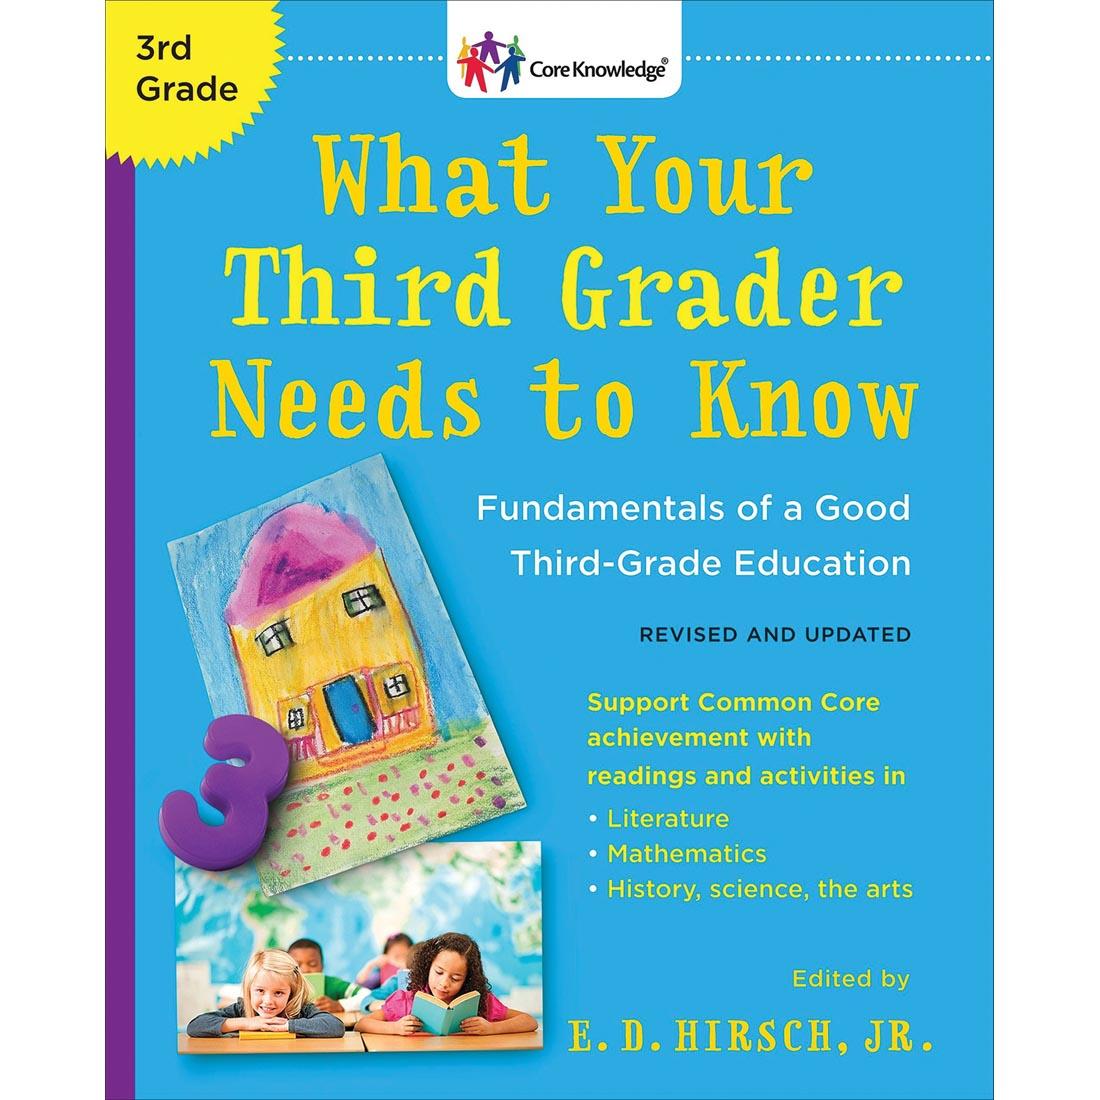 What Your Third Grader Needs To Know